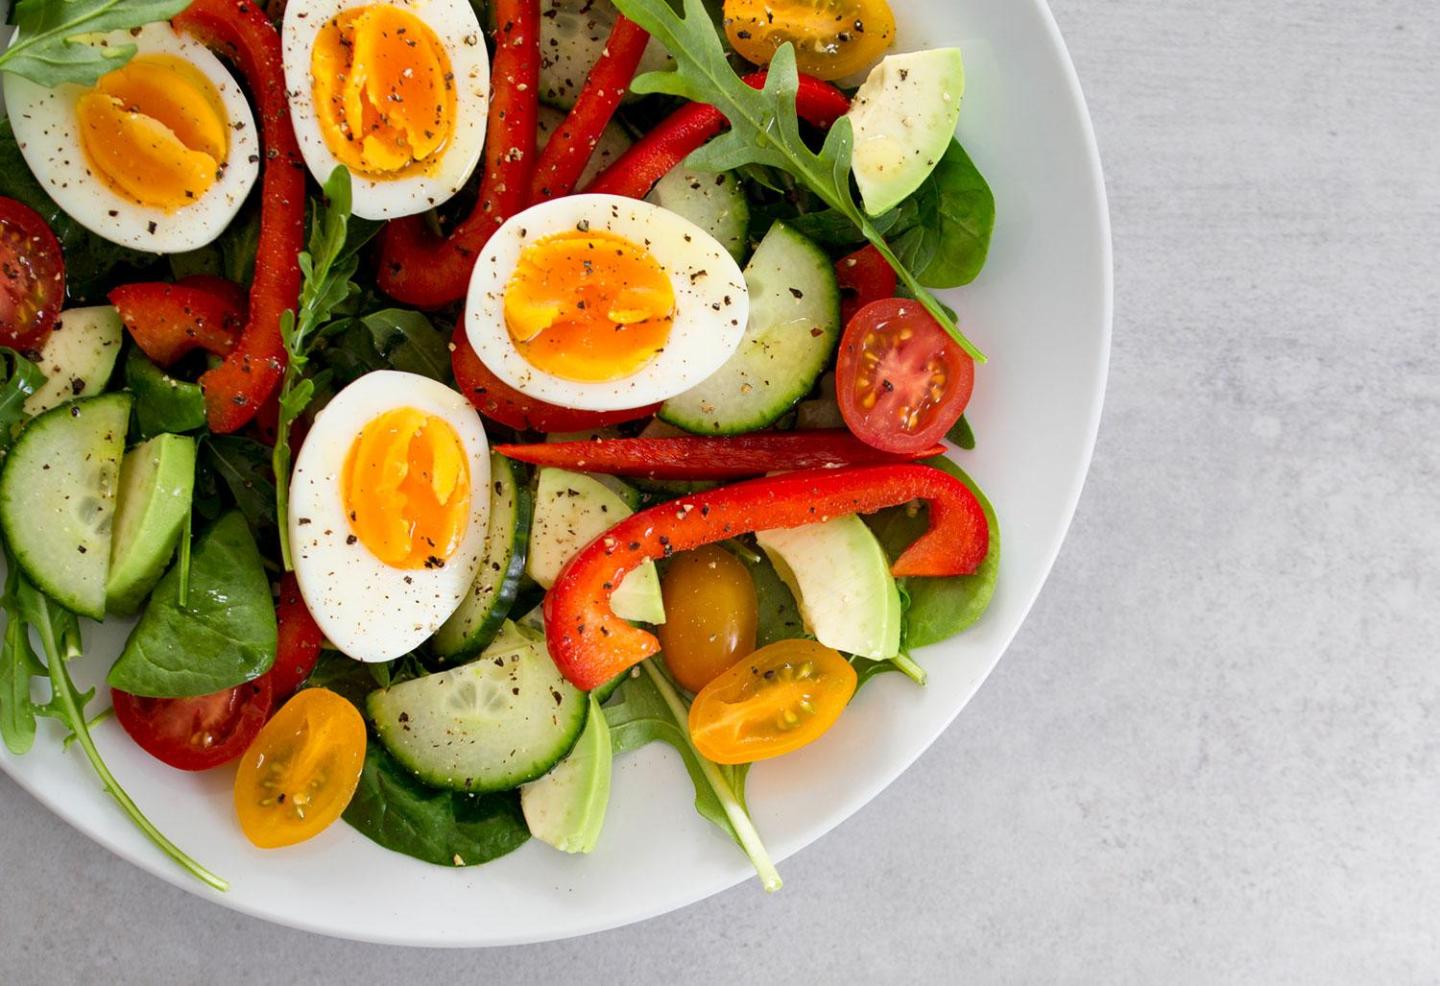 Weight loss with boiled egg diet: Everything you need to know